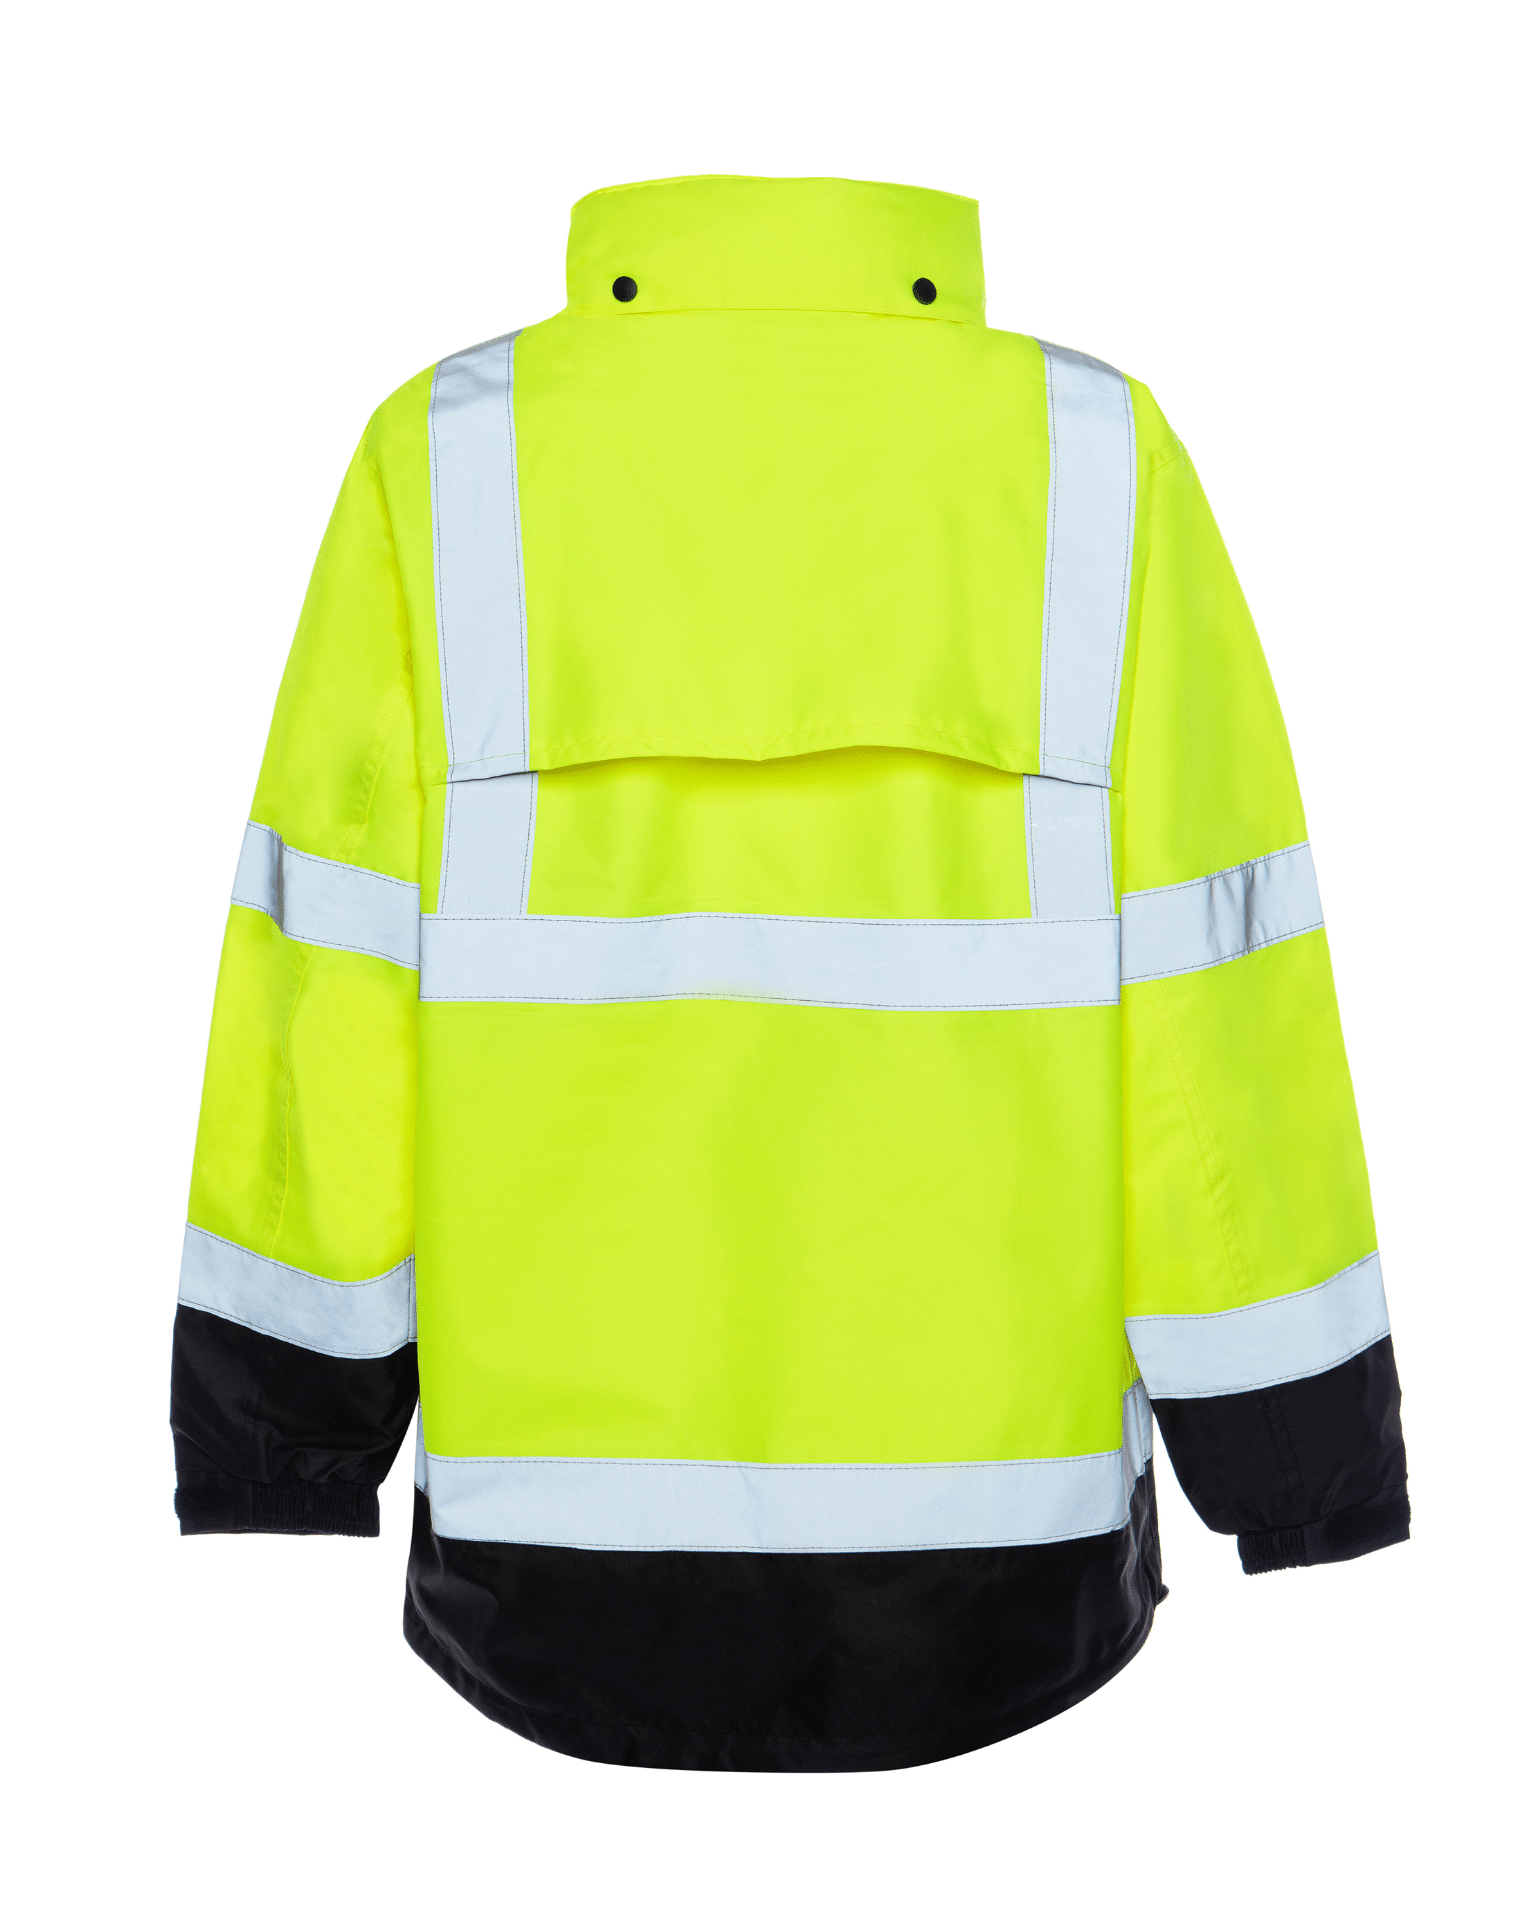 ANSI Class 2 High Visibility polyester shell with mesh lining water repellent rain jacket by Utility Pro